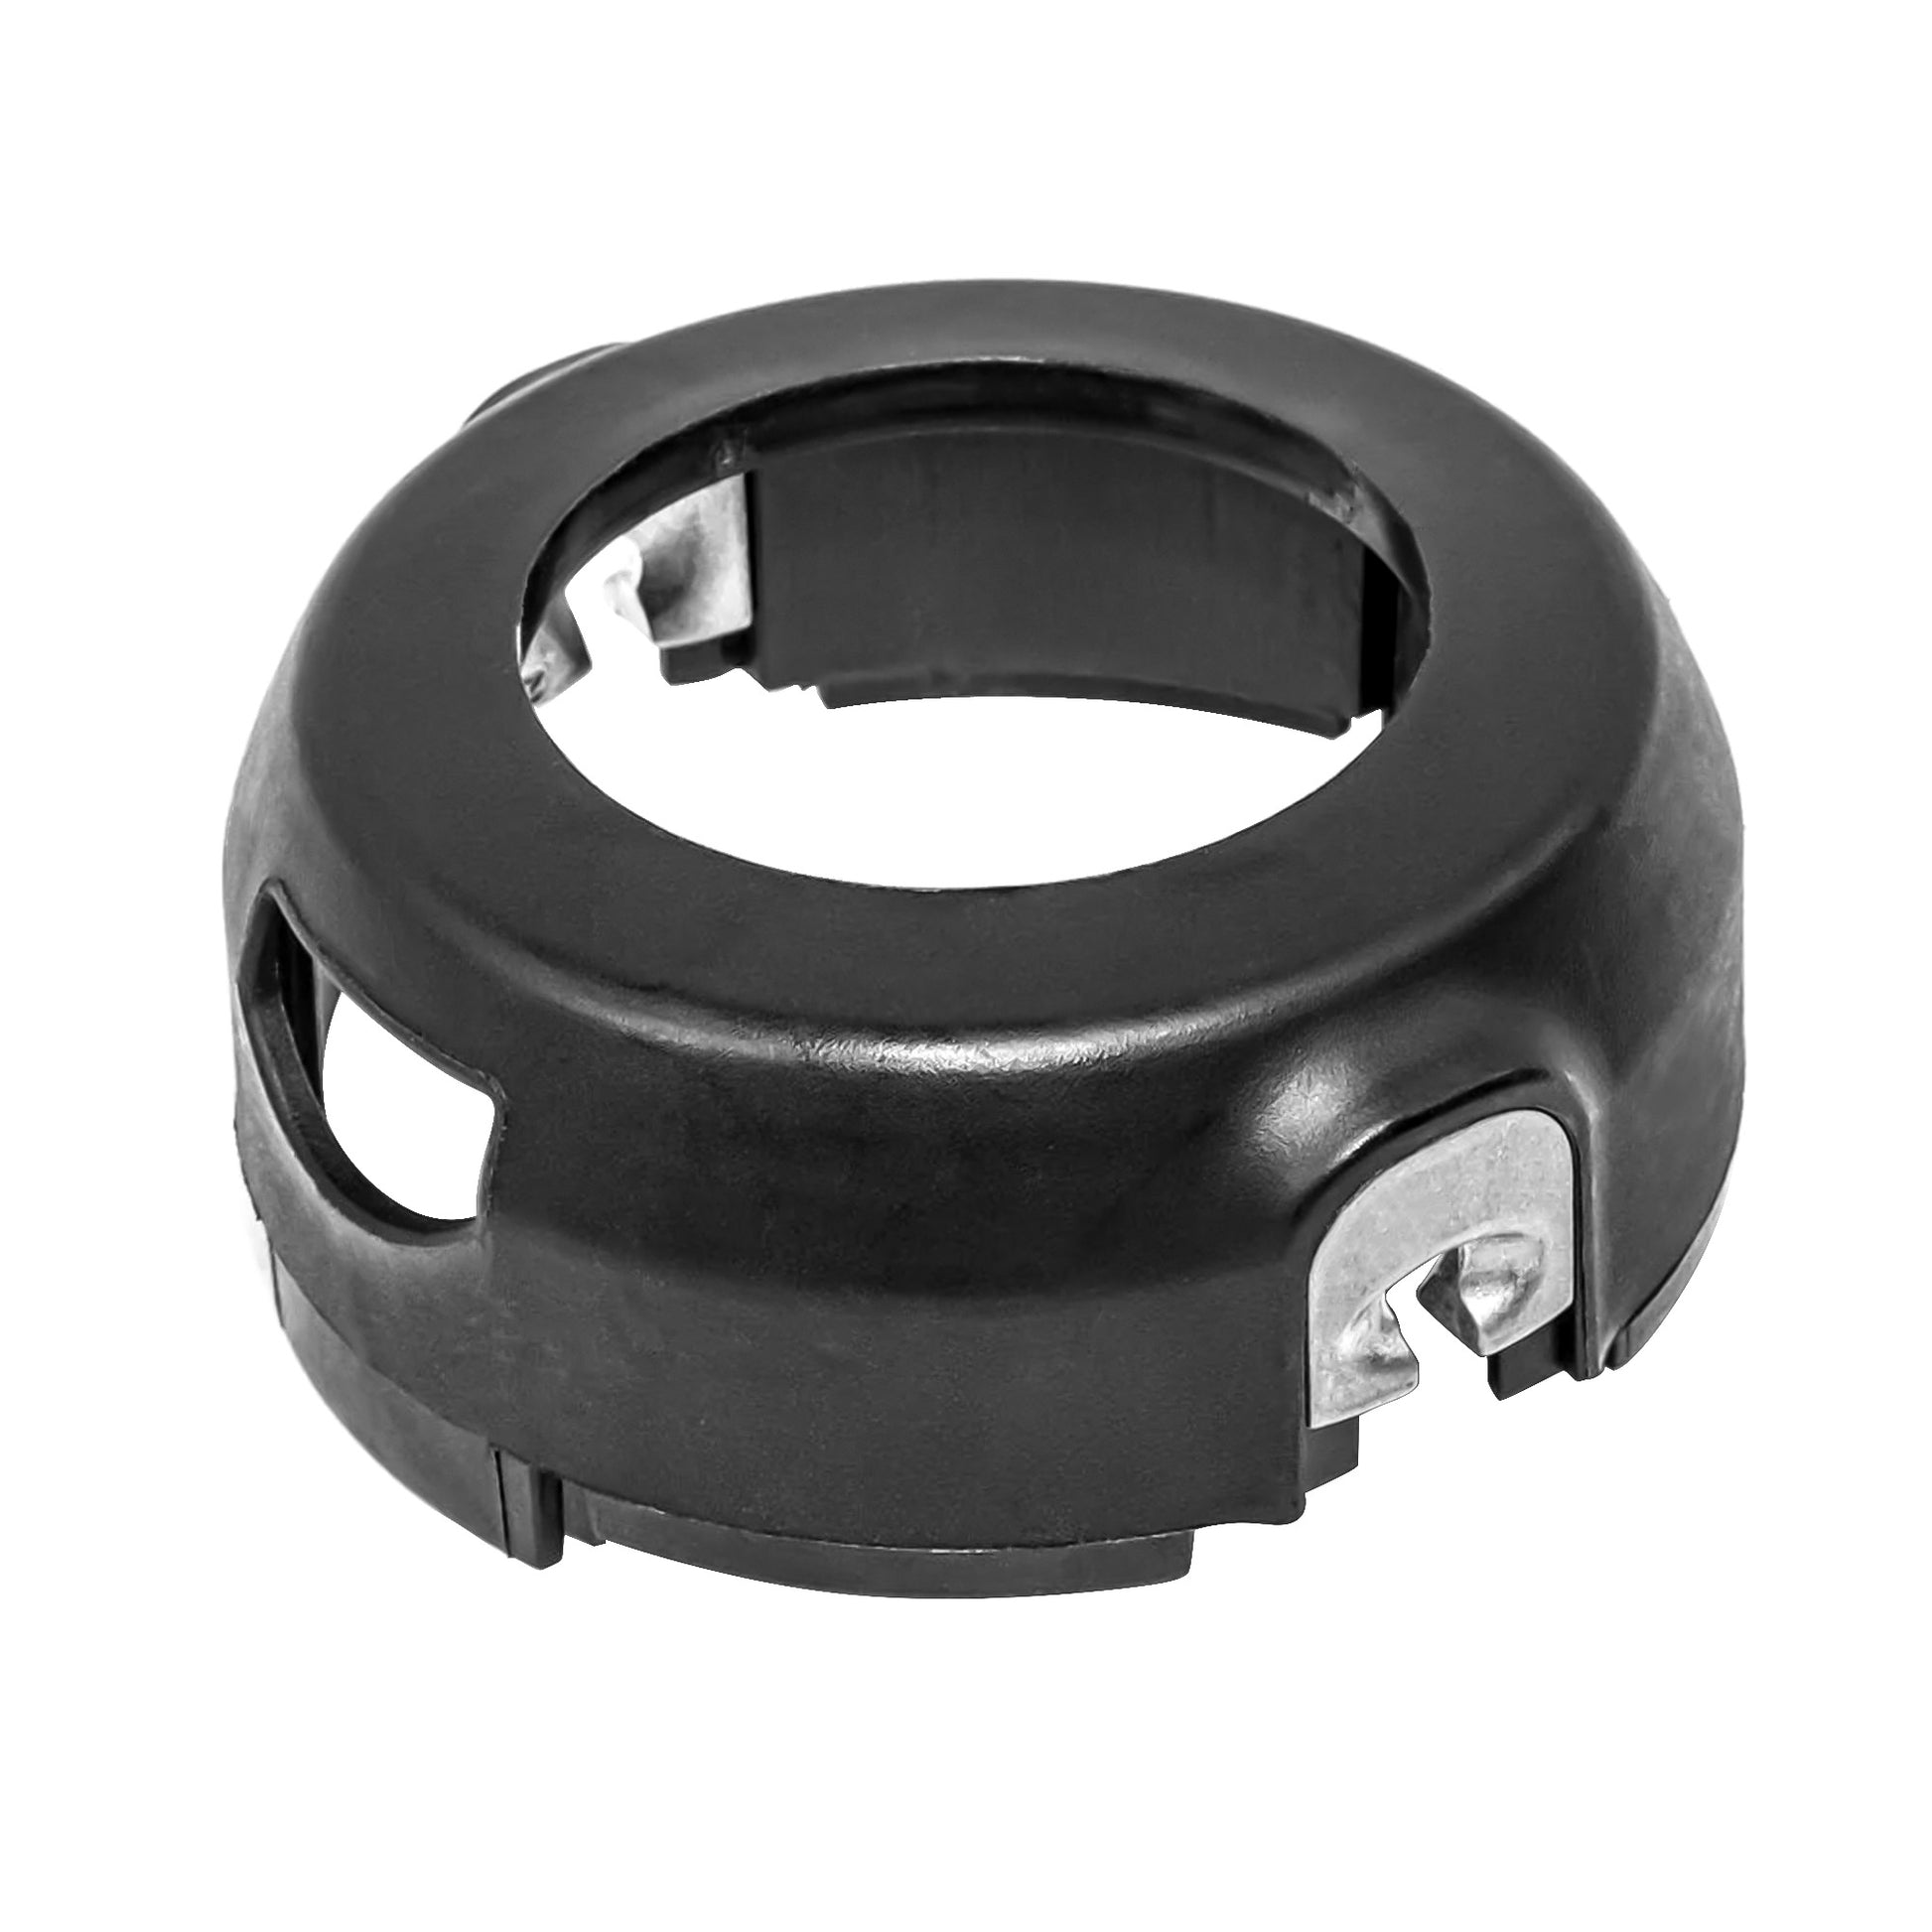  Cilivo 90583594 Replacement Spool Cover for Black